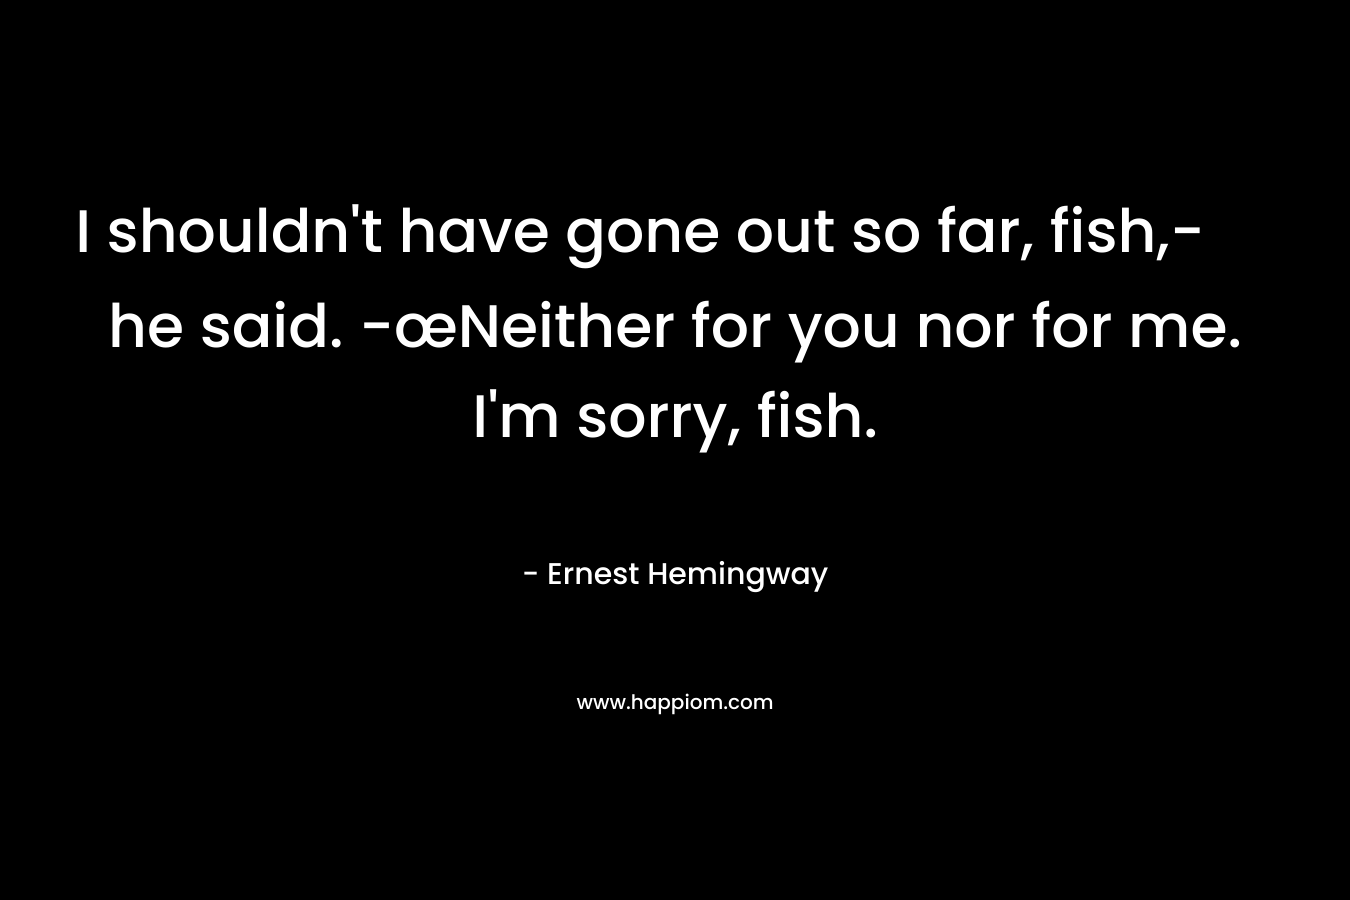 I shouldn't have gone out so far, fish,- he said. -œNeither for you nor for me. I'm sorry, fish.